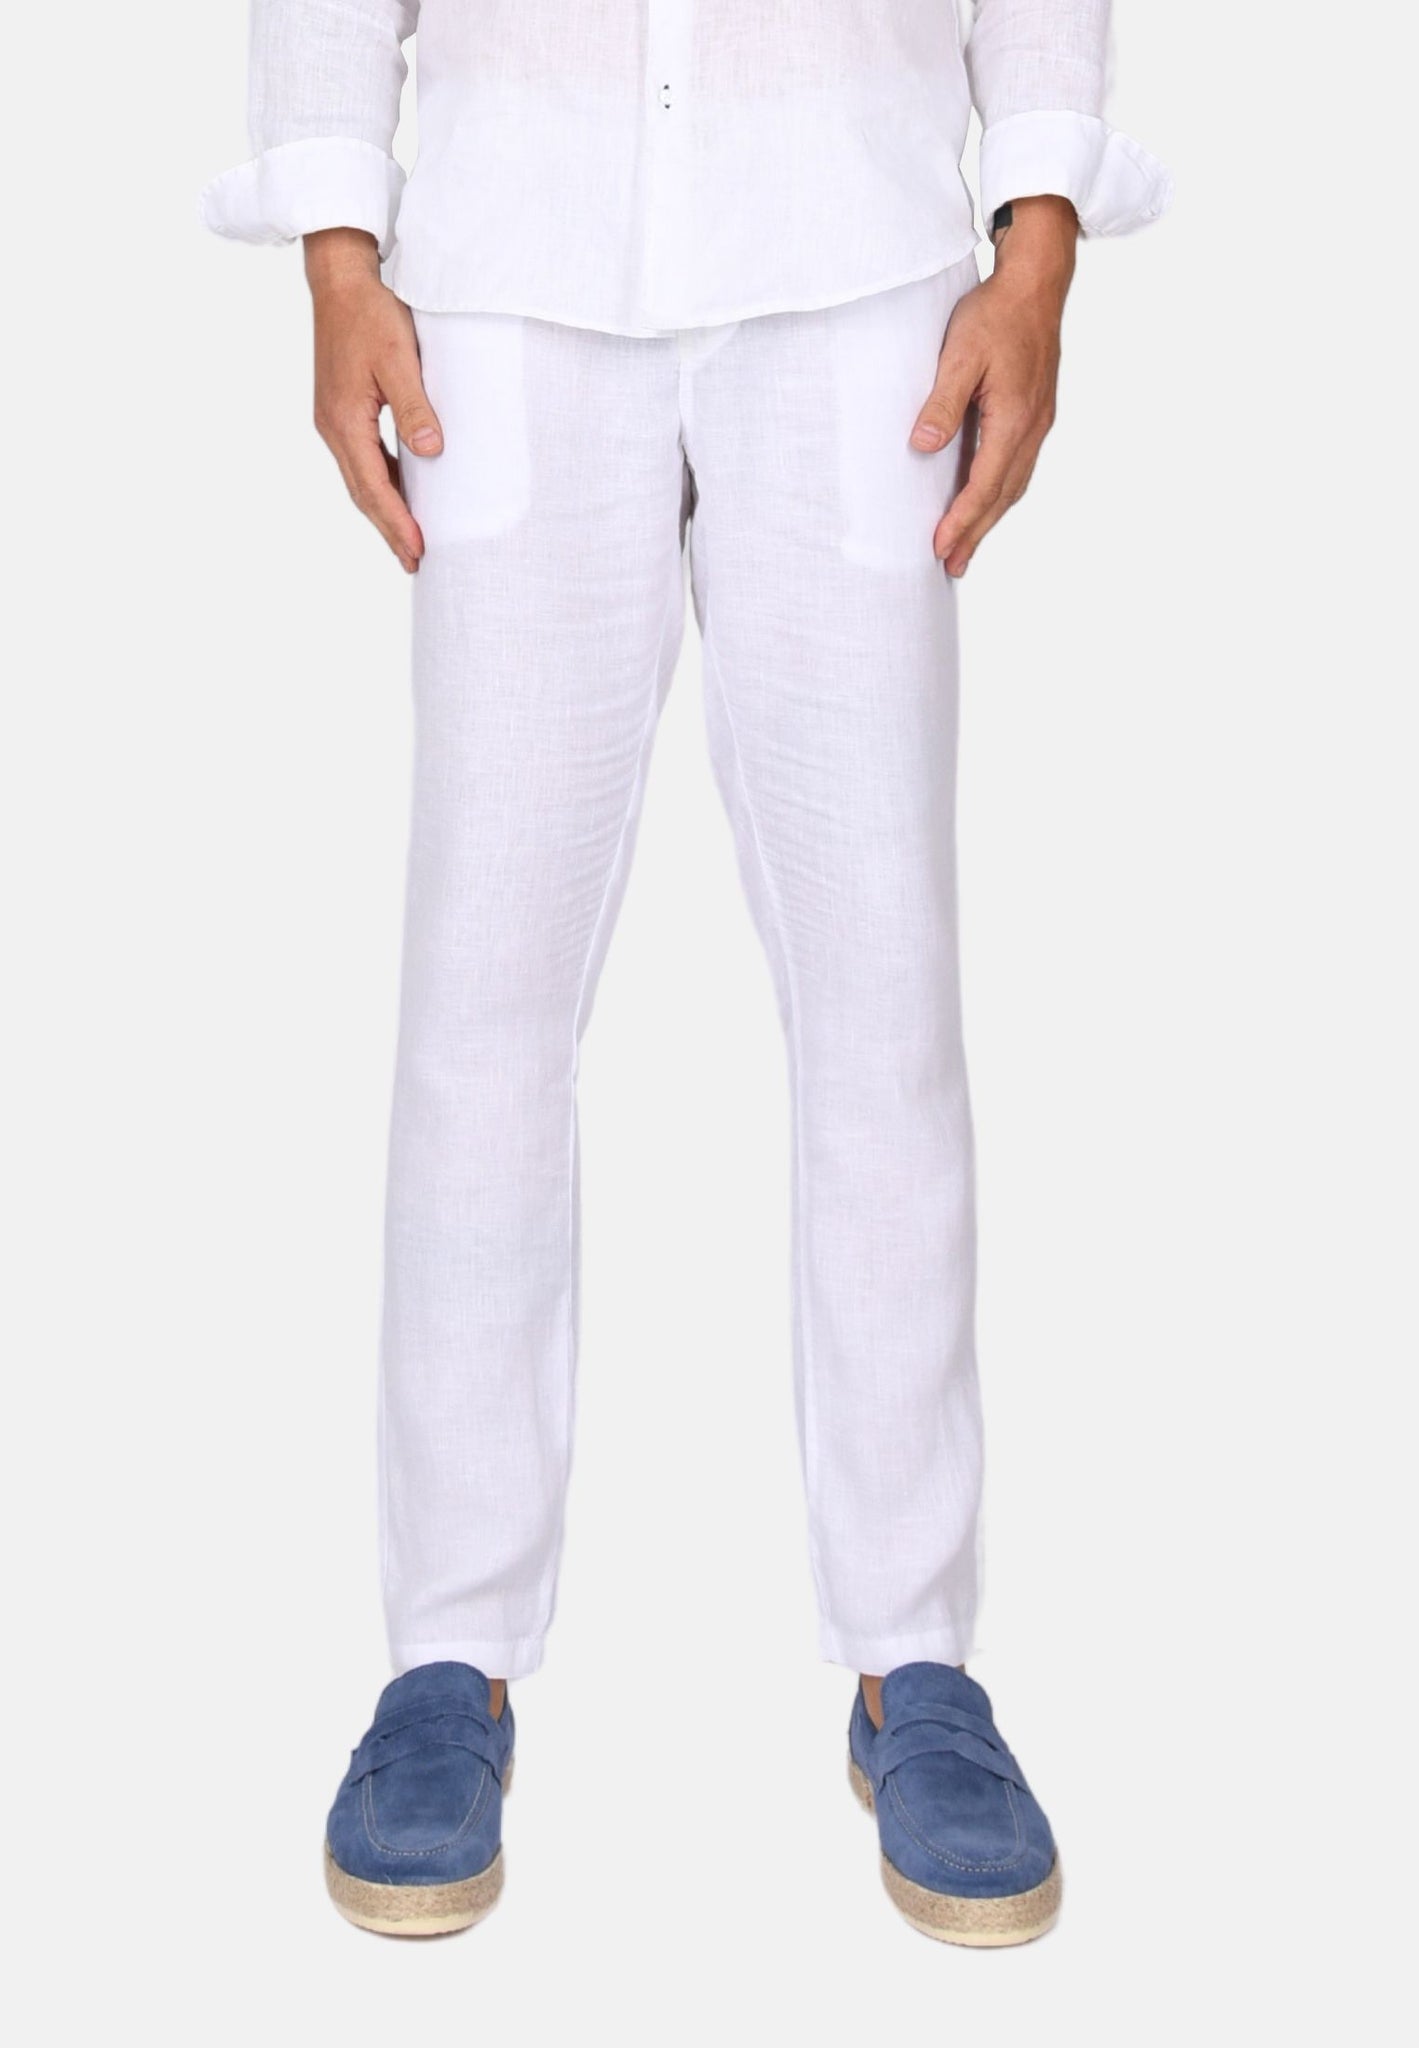 Solid color linen trousers